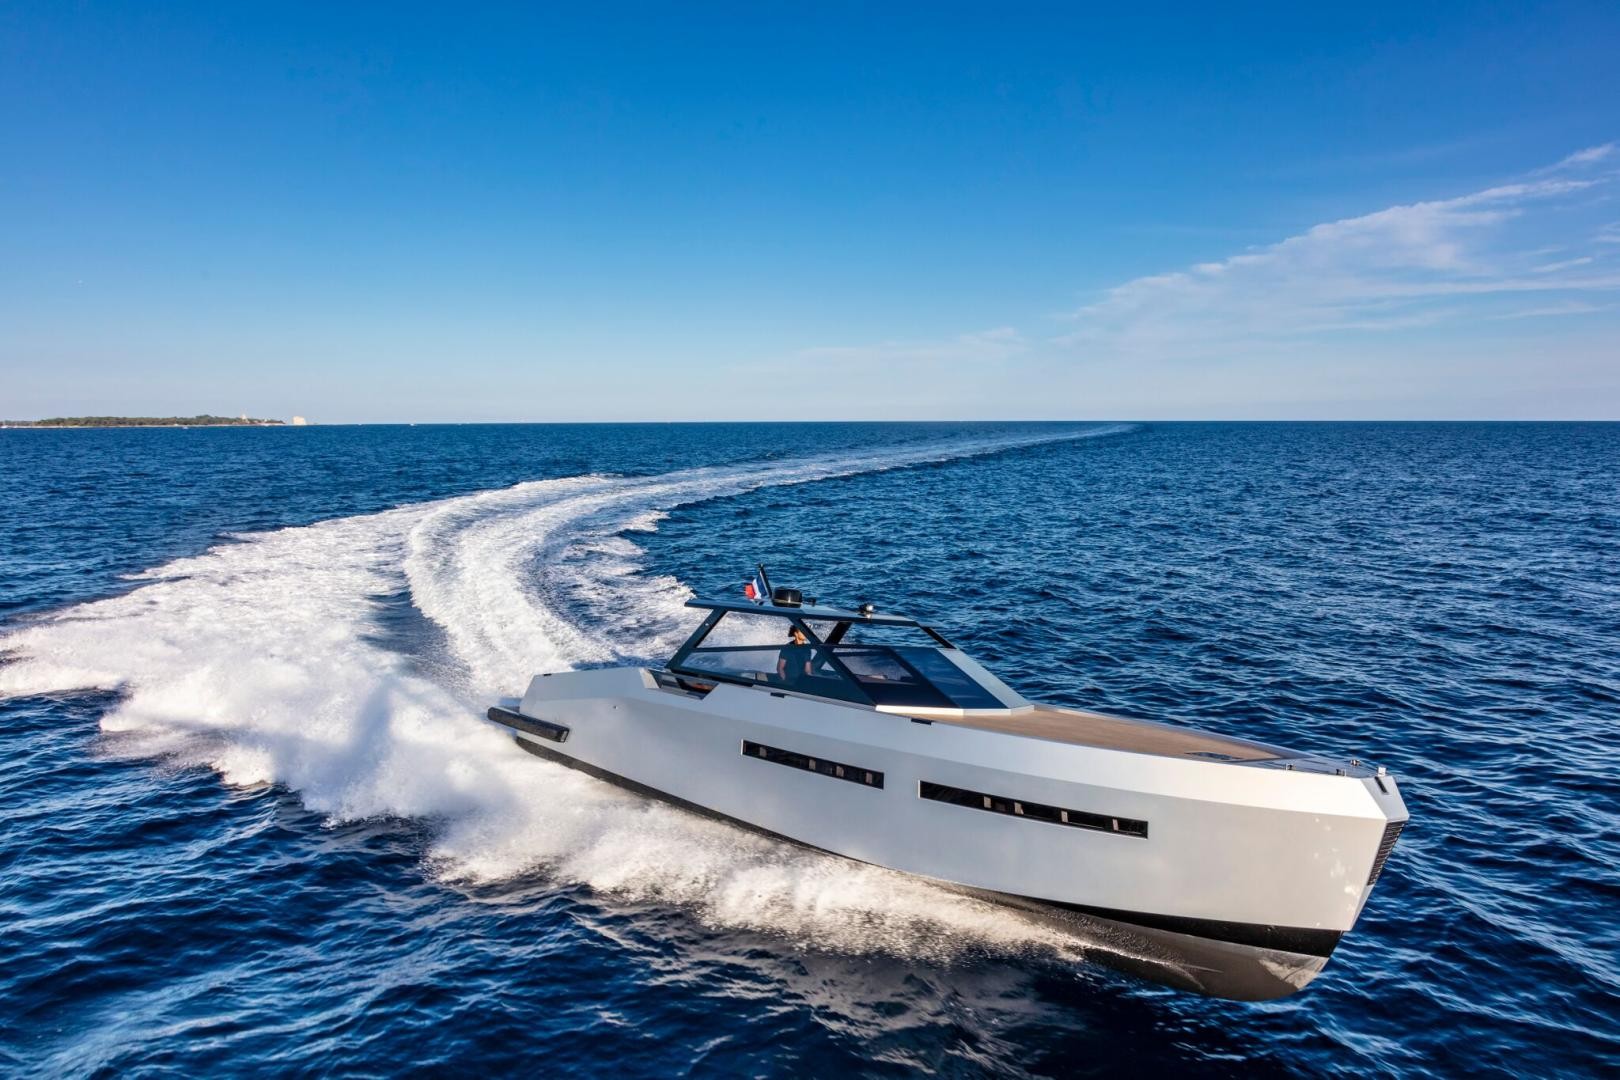 The new Mazu 52HT successfully performed at the 2018 Monaco Yacht Show